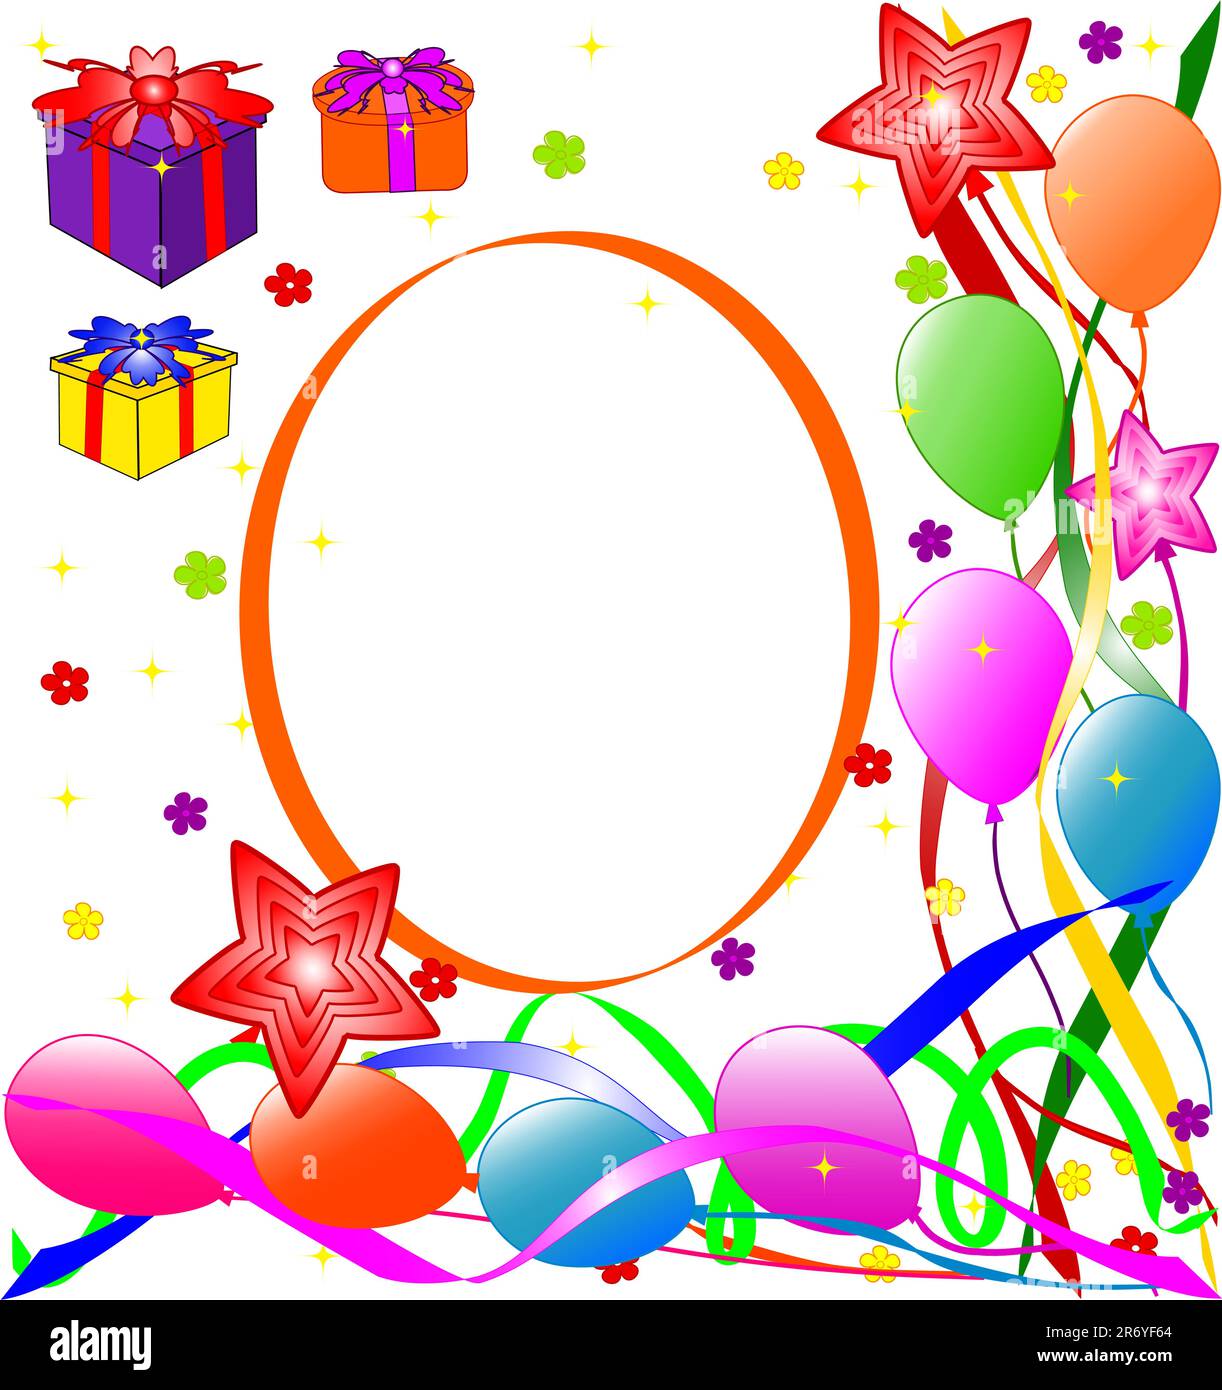 vector illustration of a Happy Birthday background Stock Vector Image ...